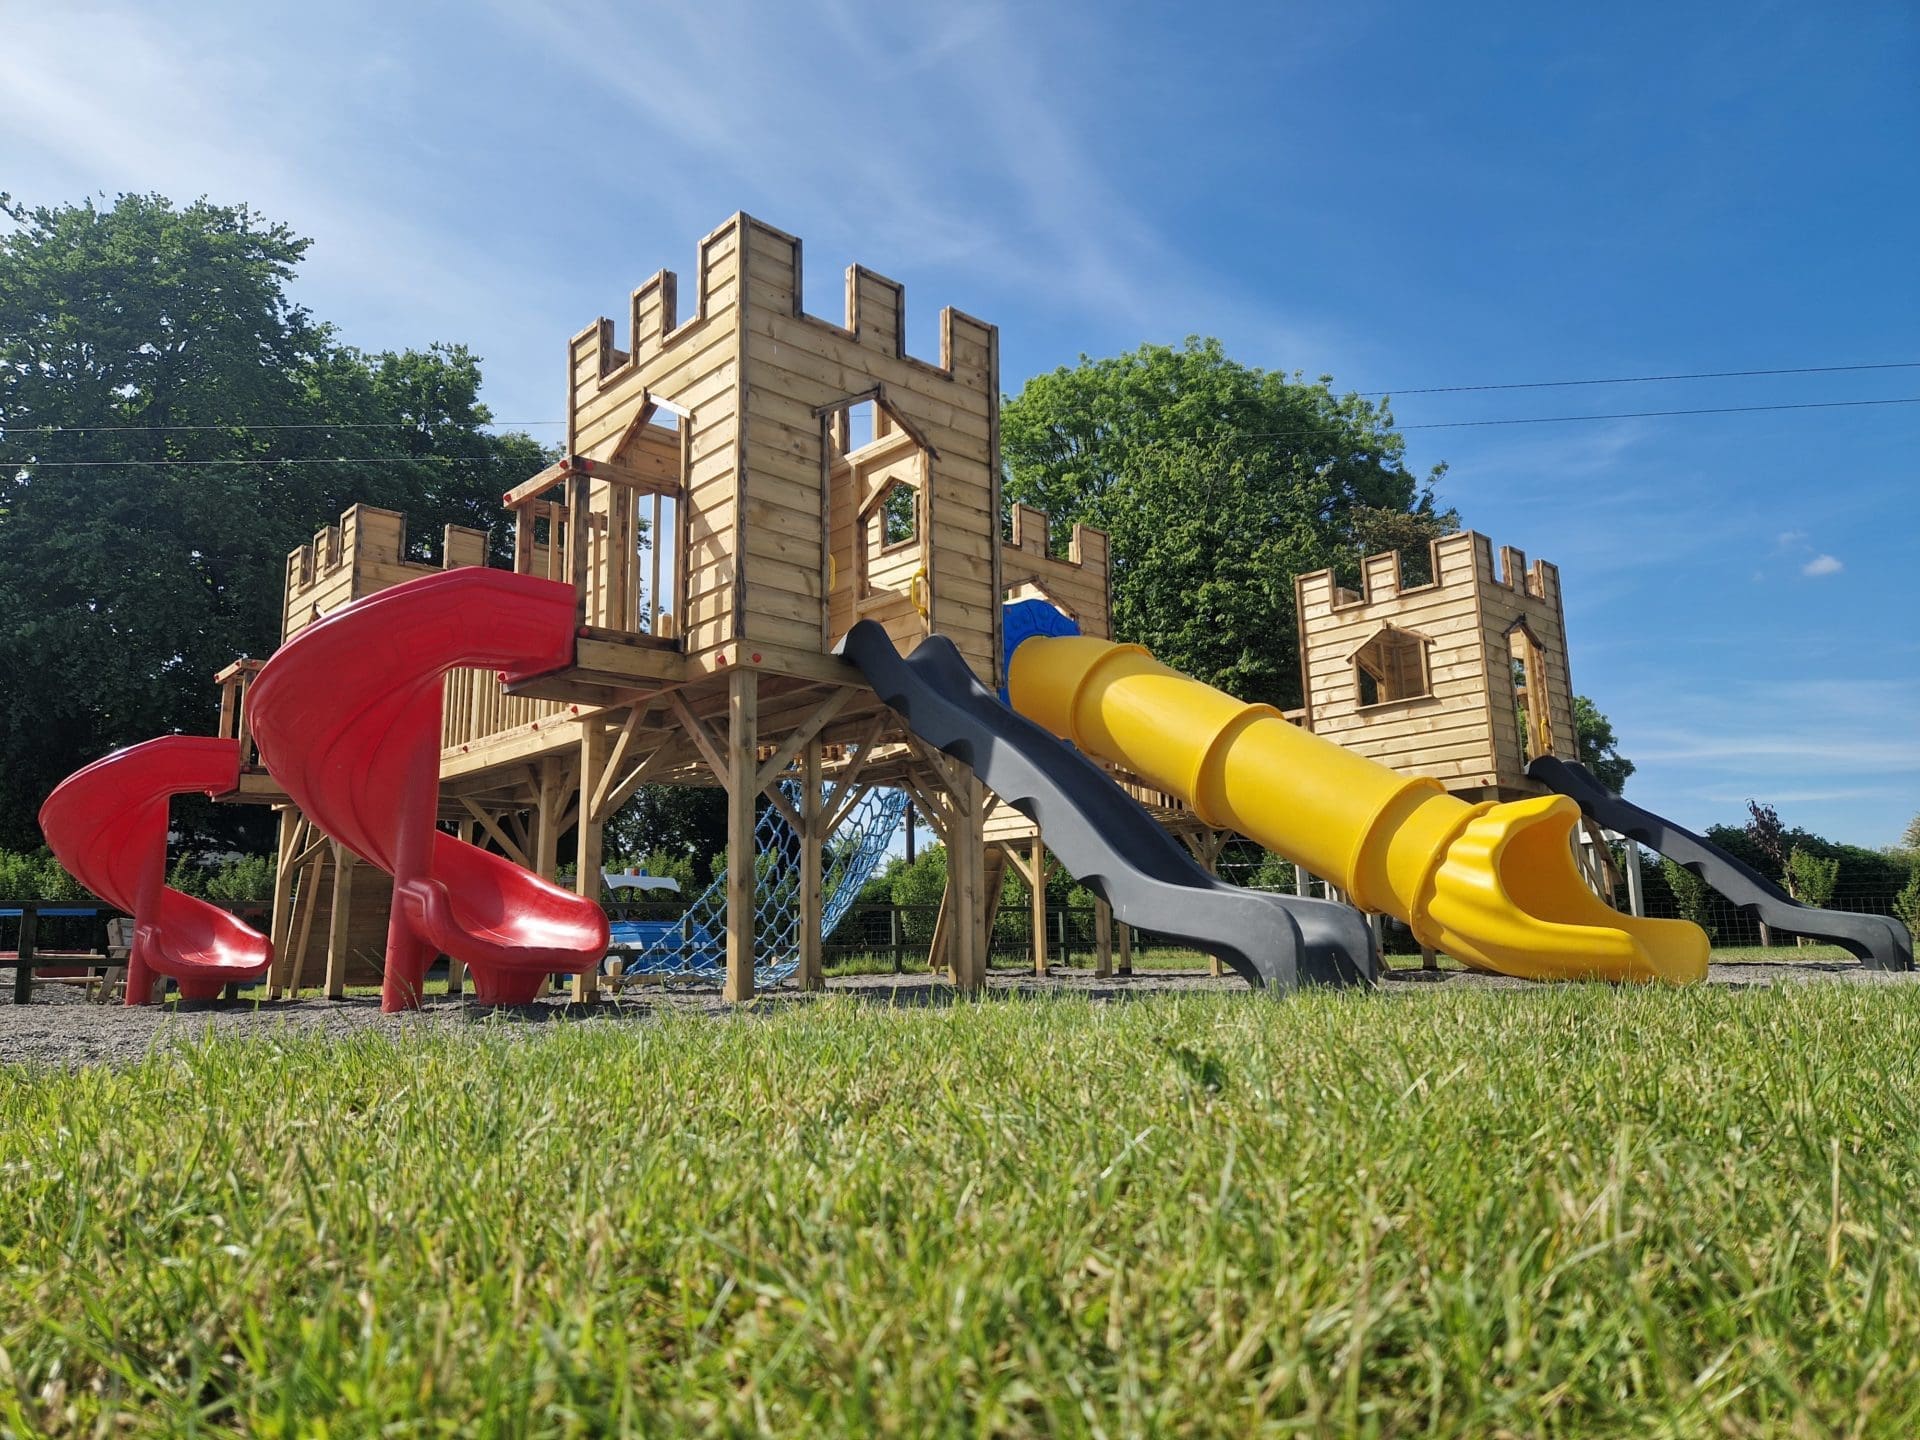 Mellowes Adventure Centre for Kids Wooden Castle with climbing frames and slides outdoor playground and activity centre